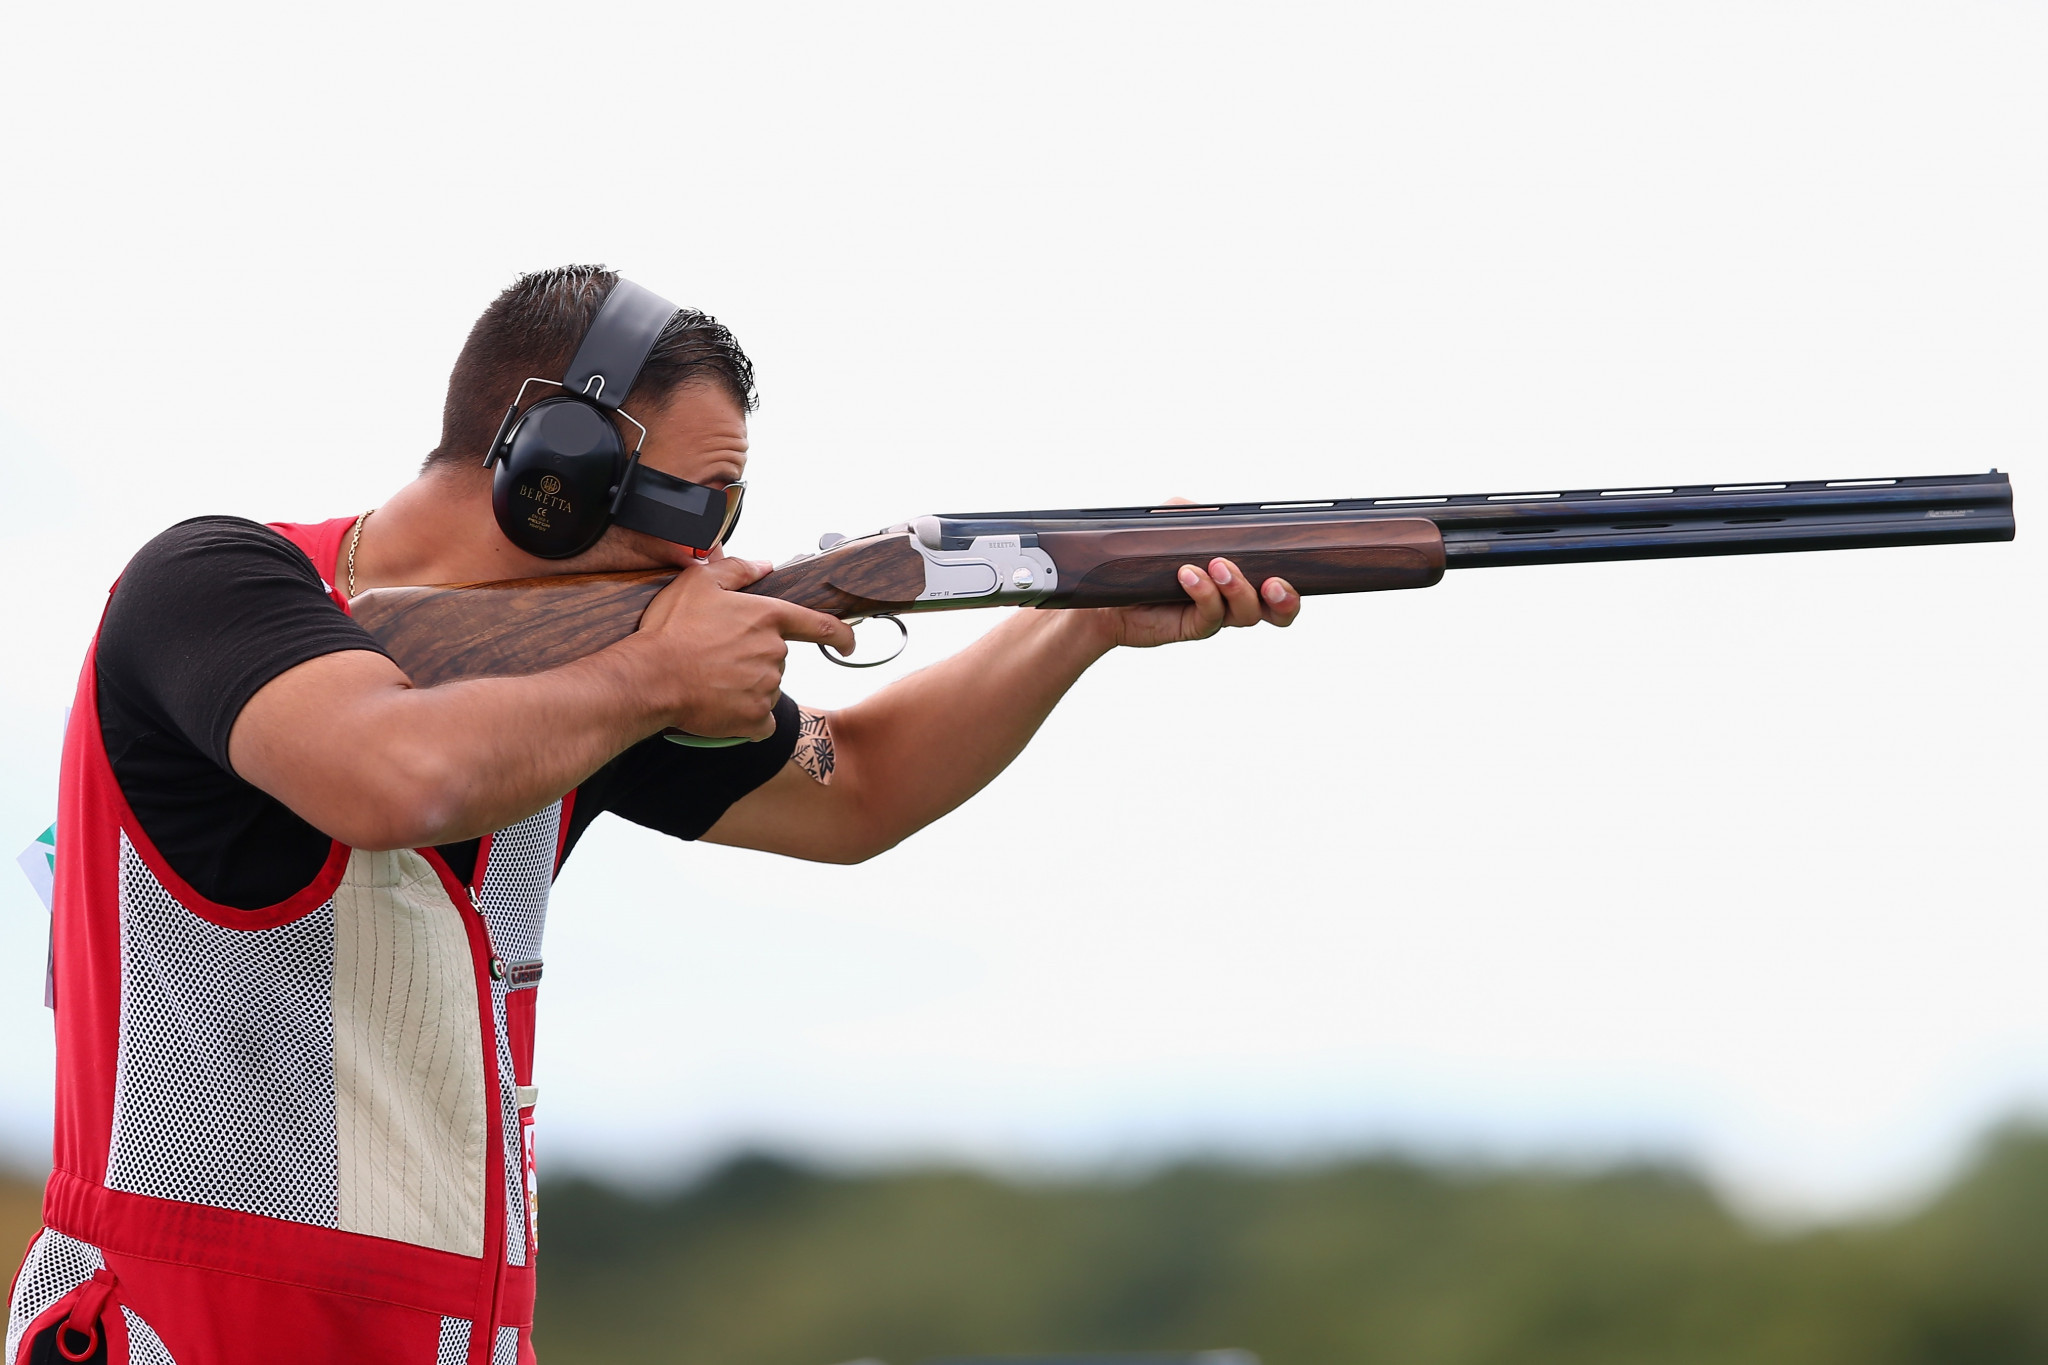 England’s Aaron Heading claimed the Commonwealth men’s trap title on the penultimate day of action at the Oceania and Commonwealth Shooting Federations' Championships in Brisbane ©Getty Images